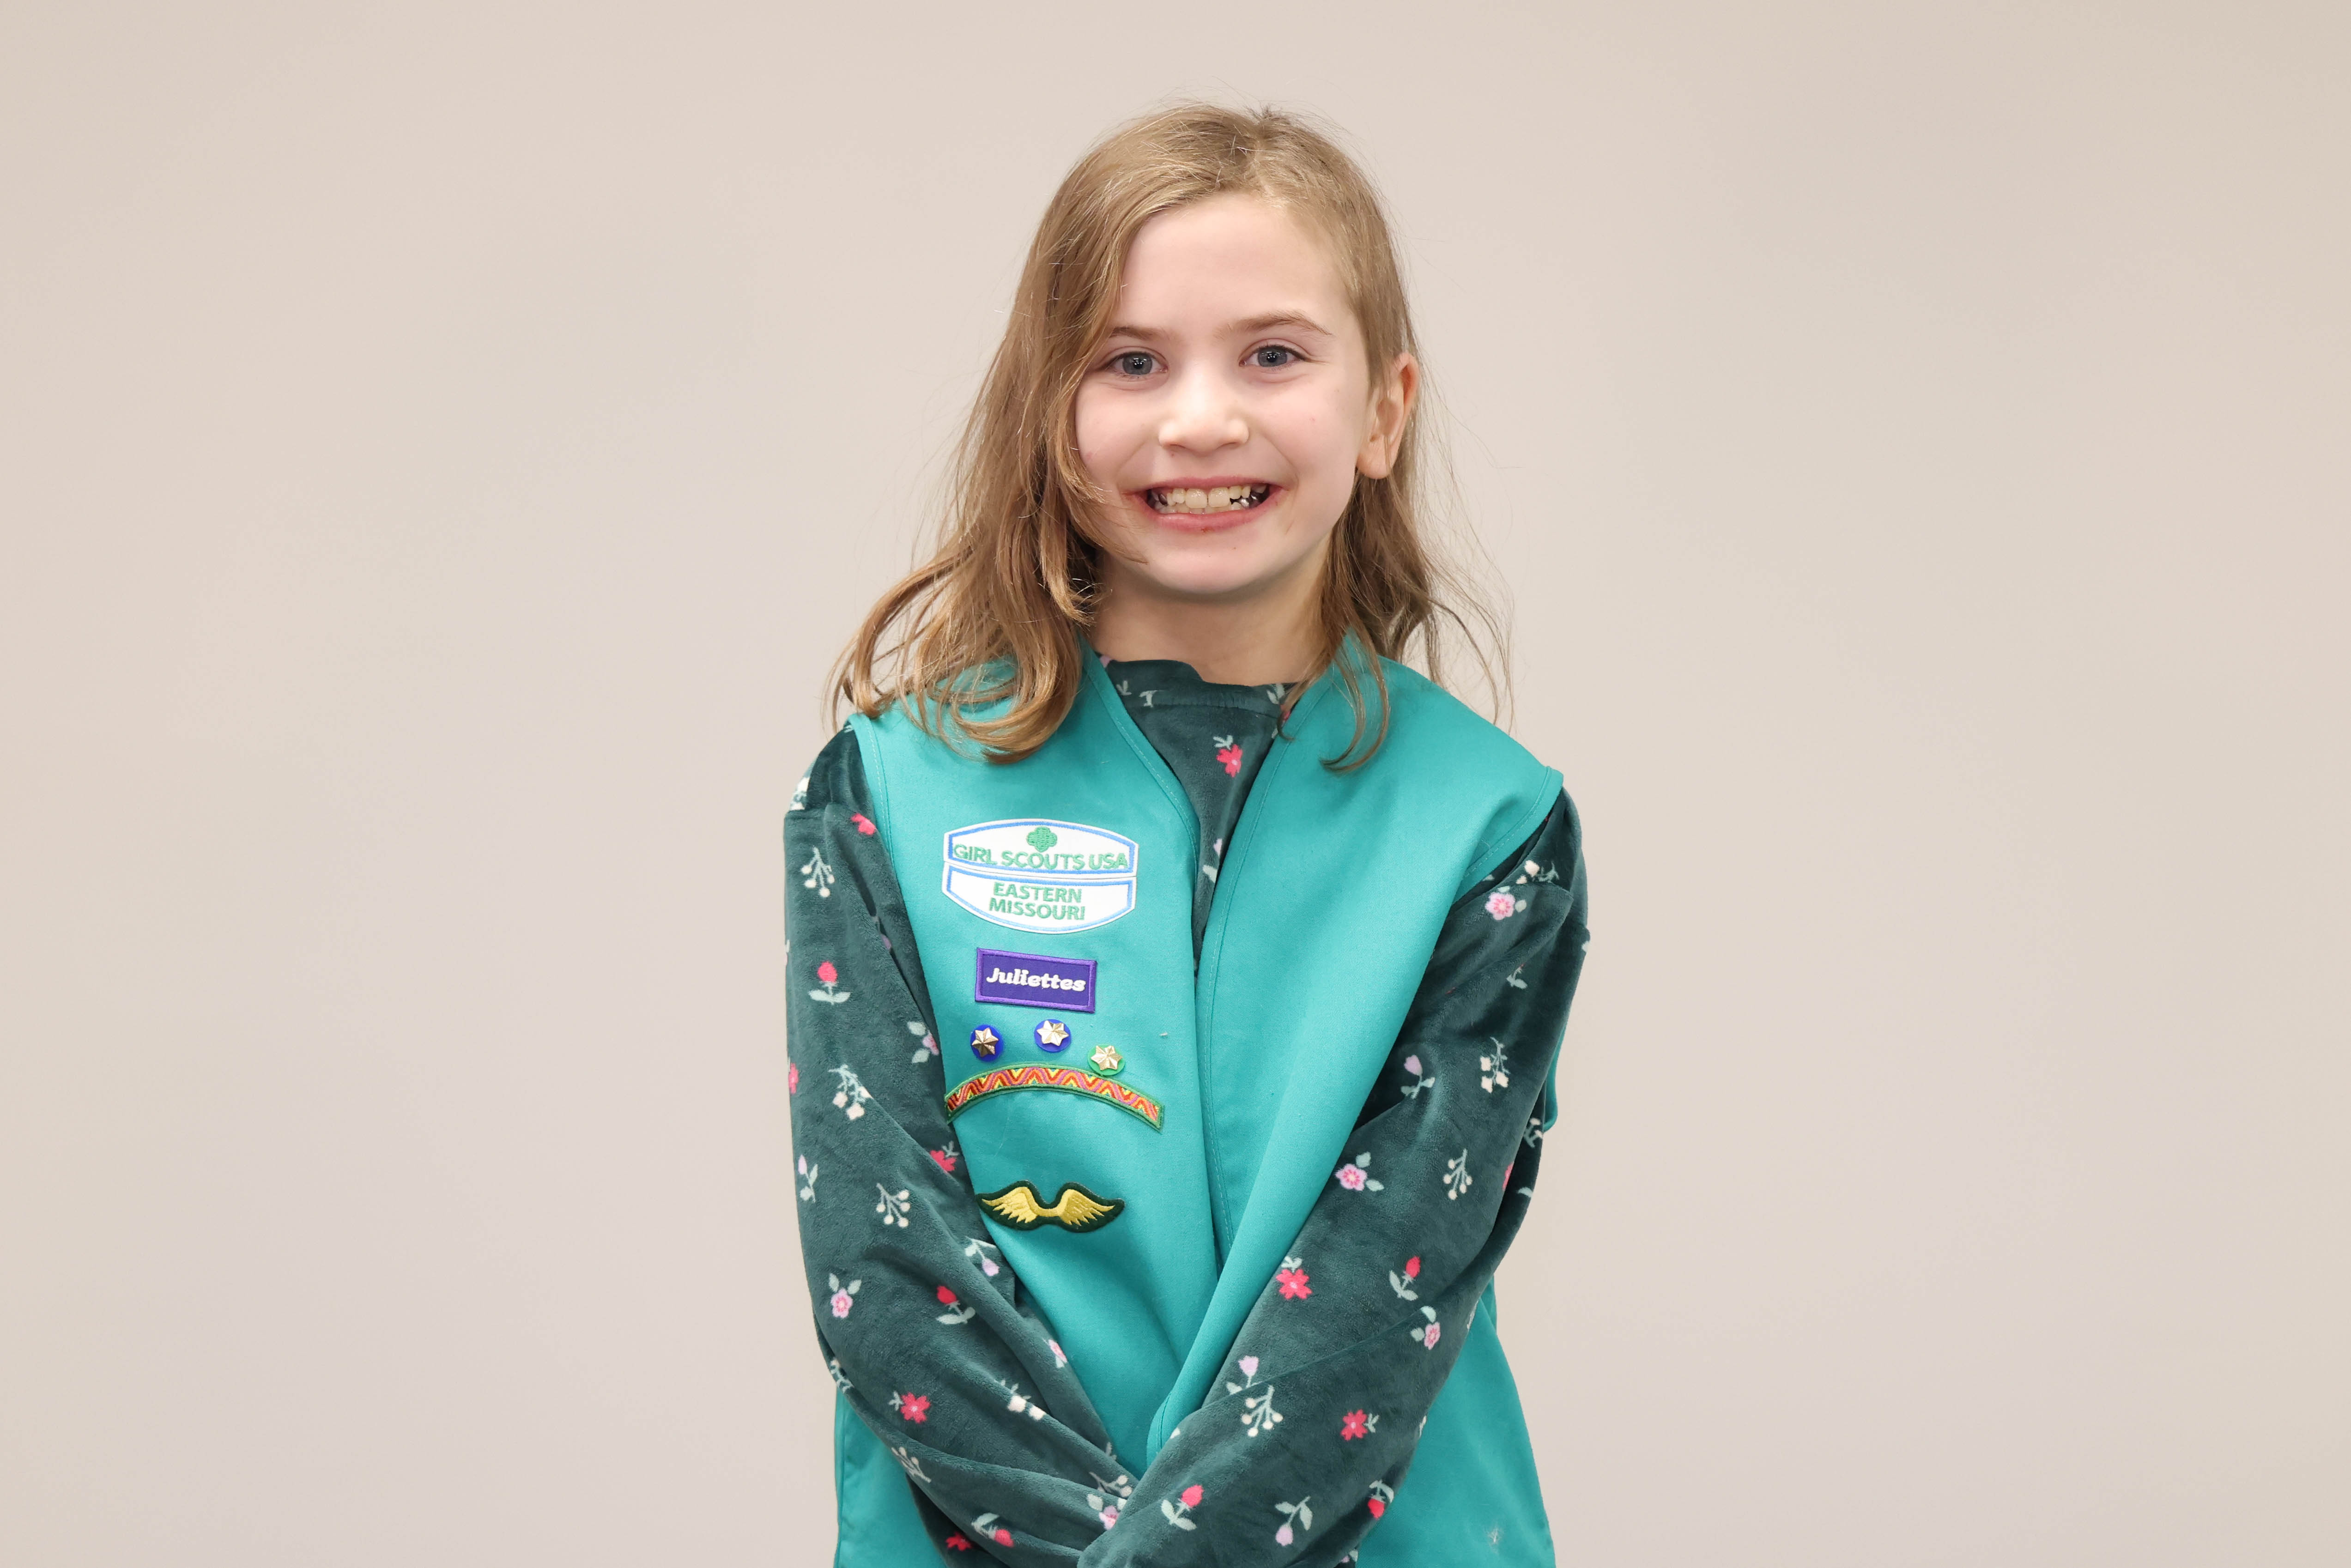 A young girl wearing a Girls Scouts shirt is shown at a recognition program.